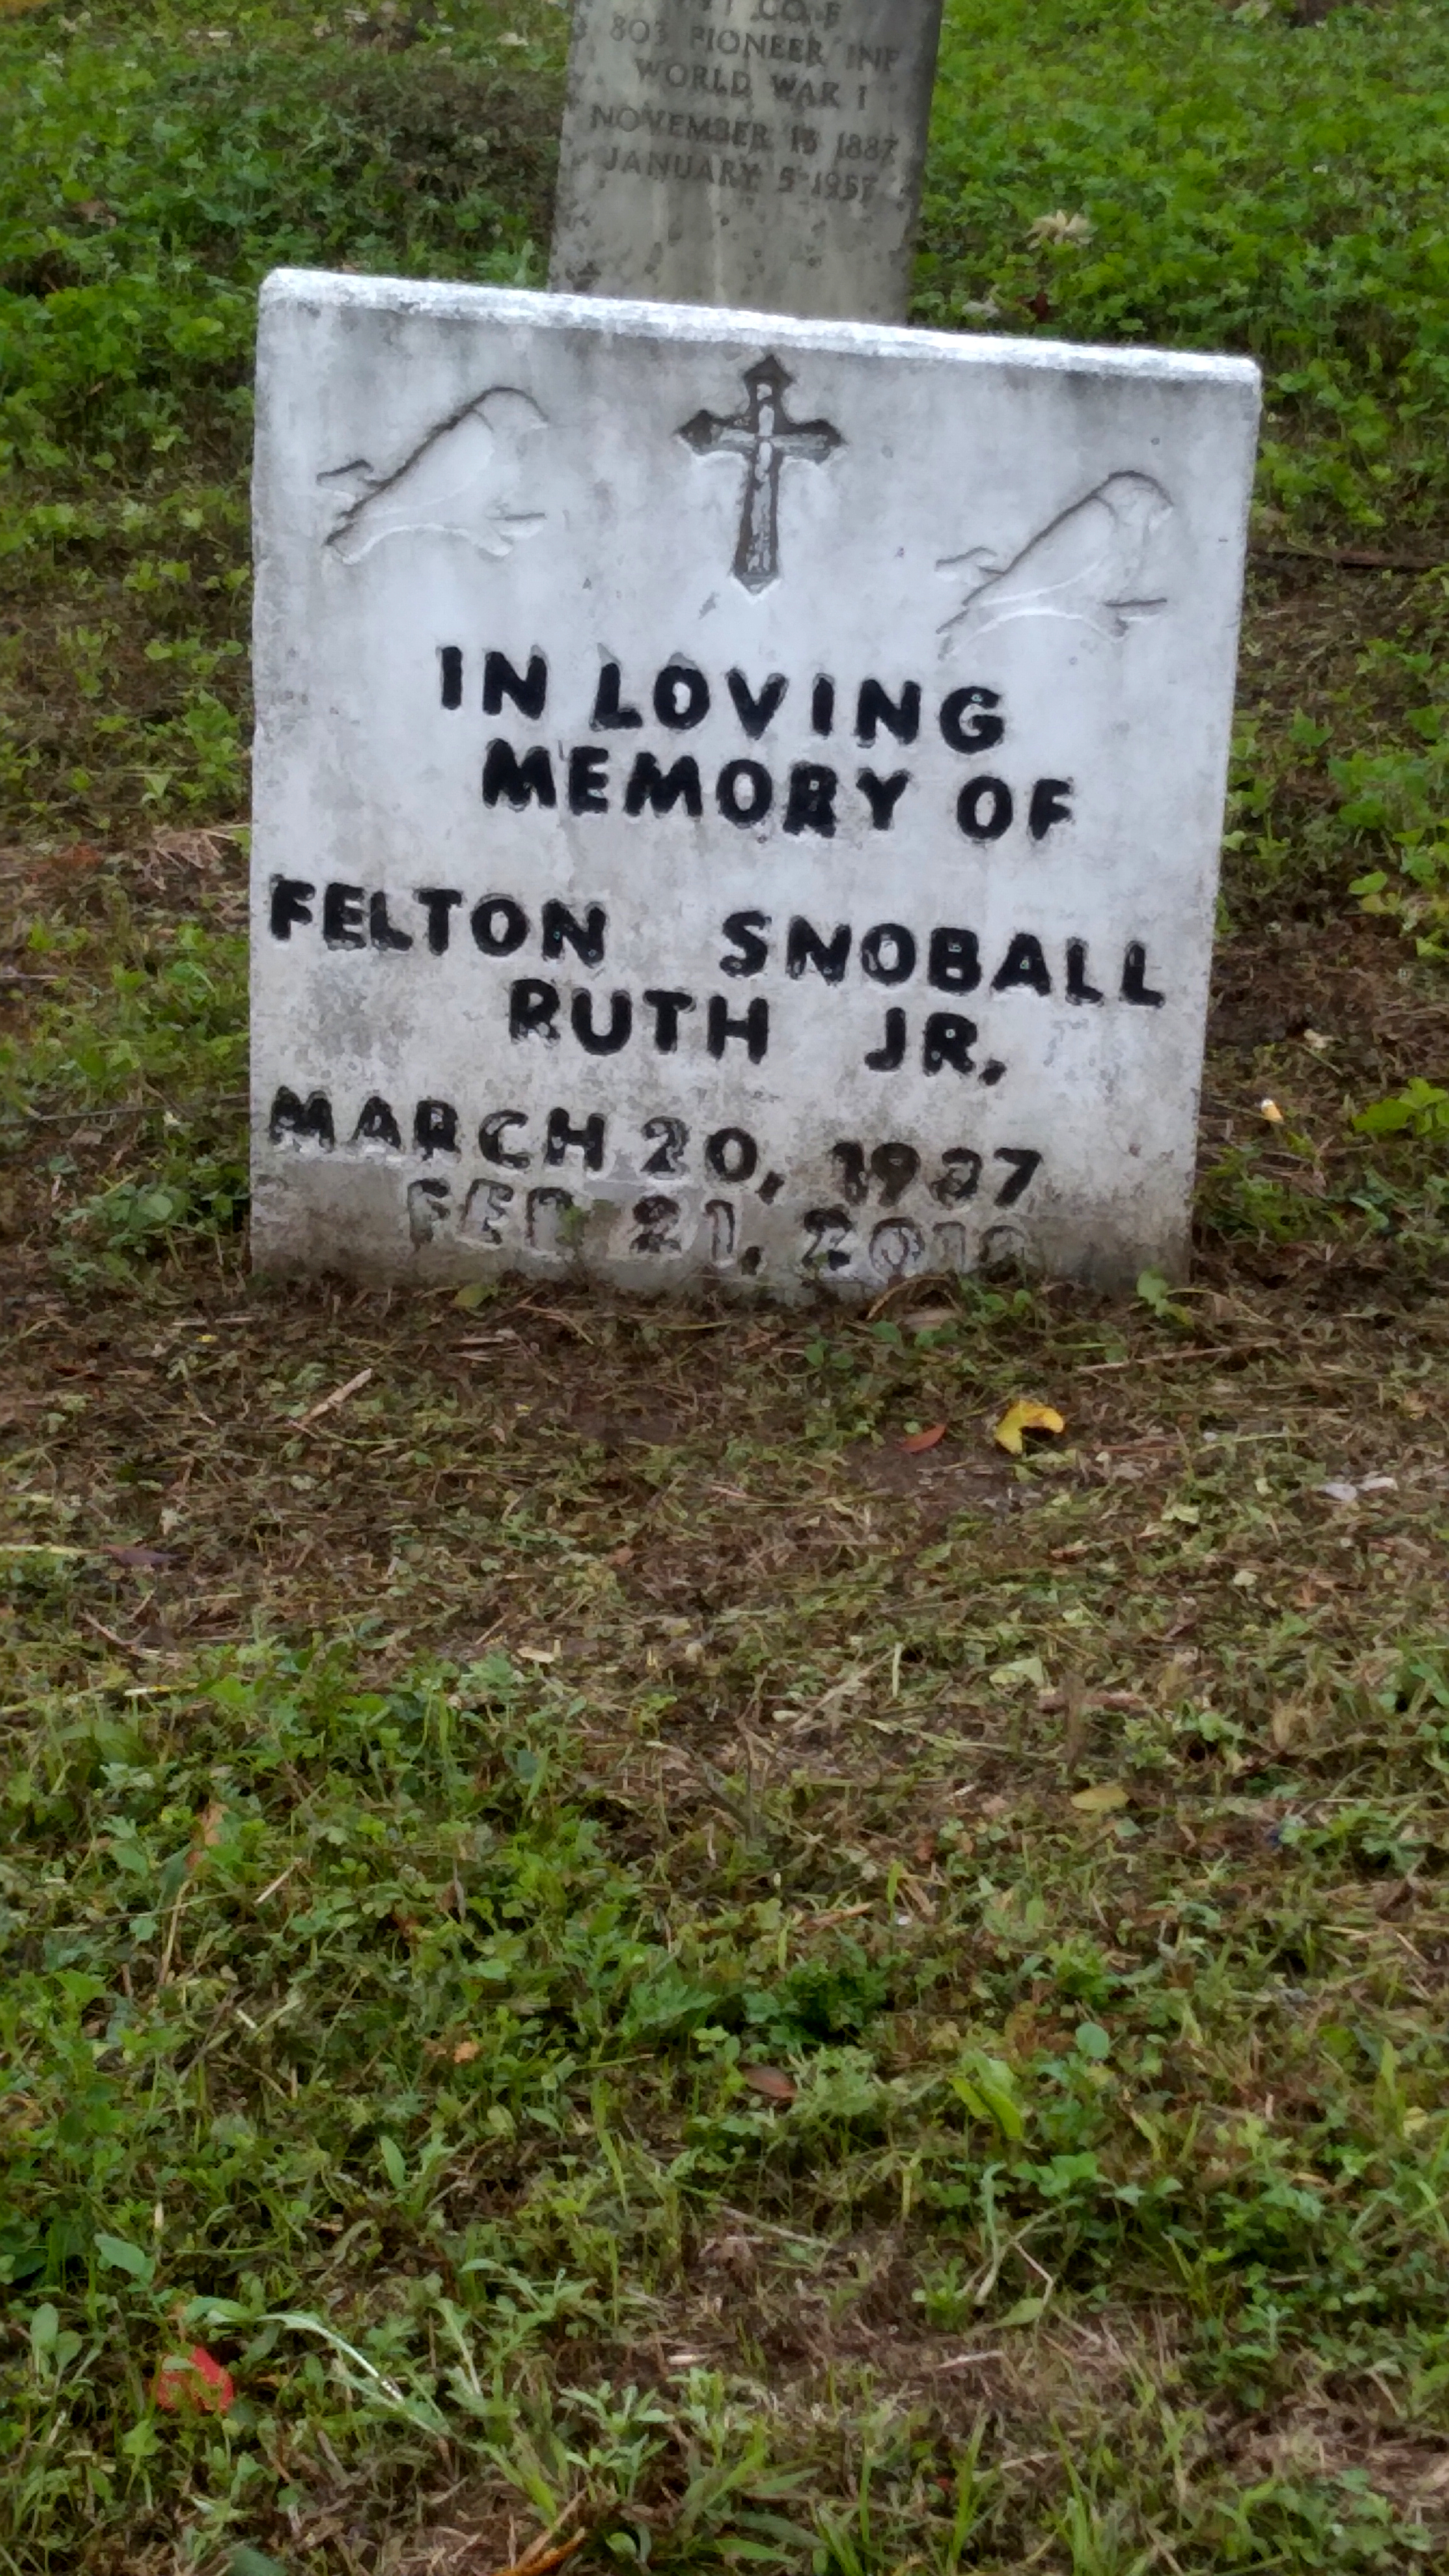 With Gina Phillips at Holt Cemetery in New Orleans